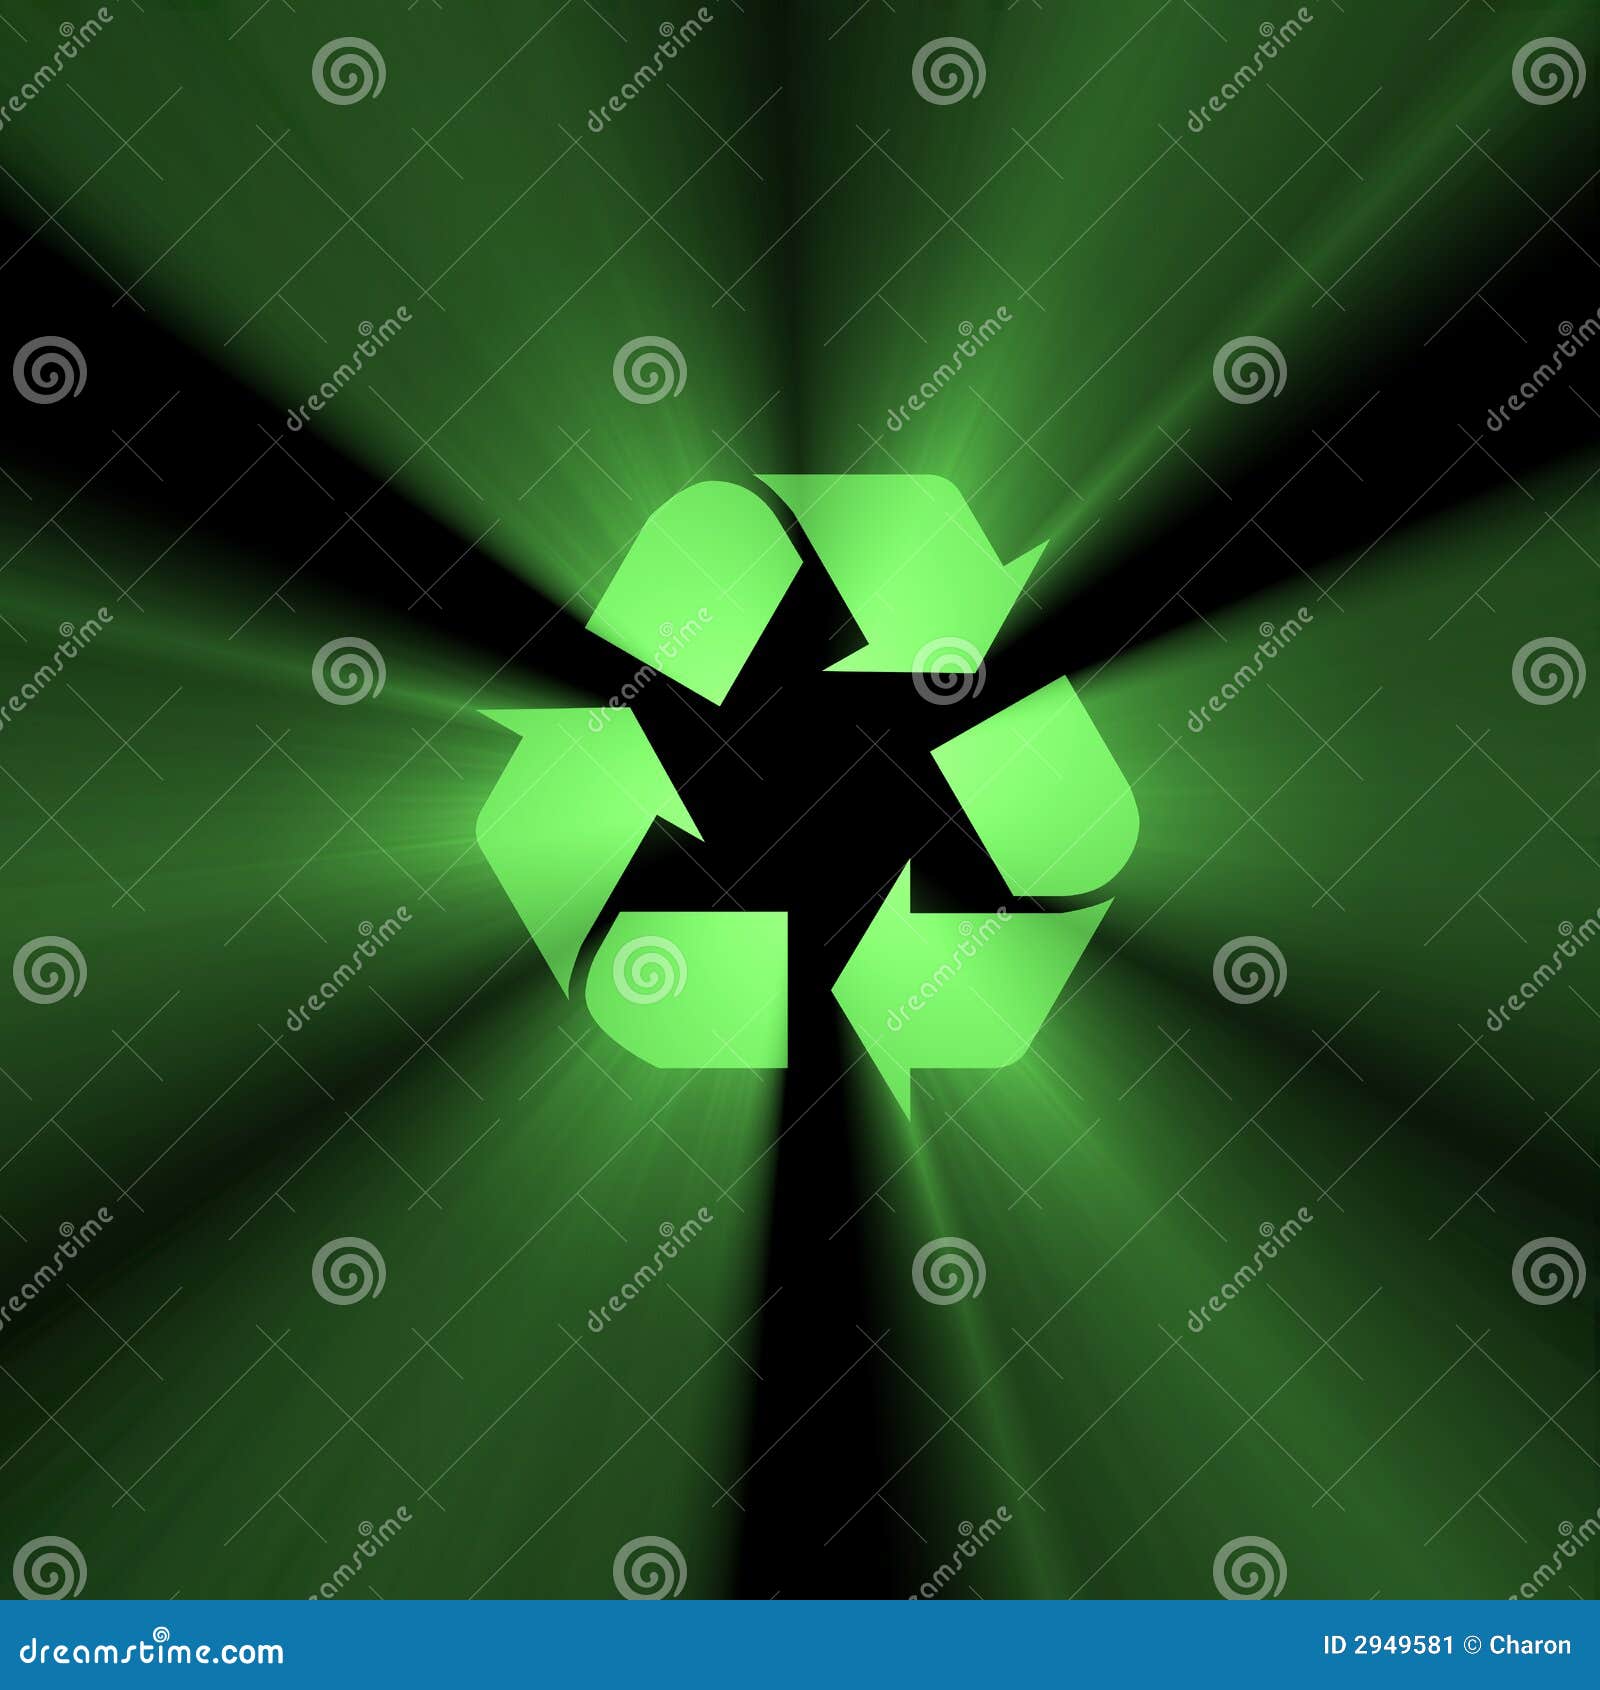 recyclable sign green light flare